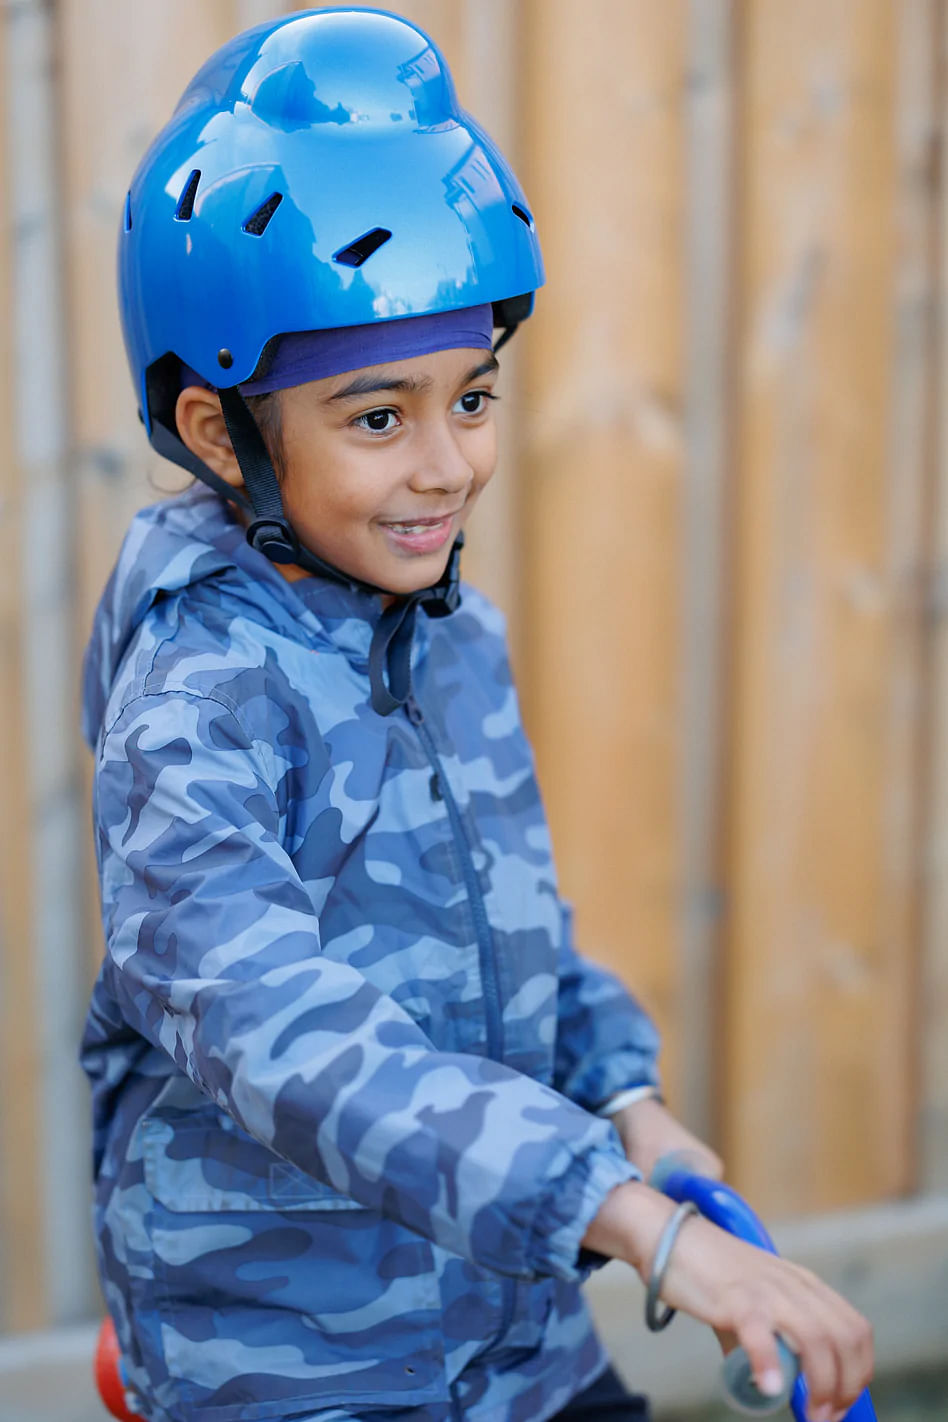 Tina Singh, a mother of three based in Canada, invented helmets that her kids could wear over their turbans.